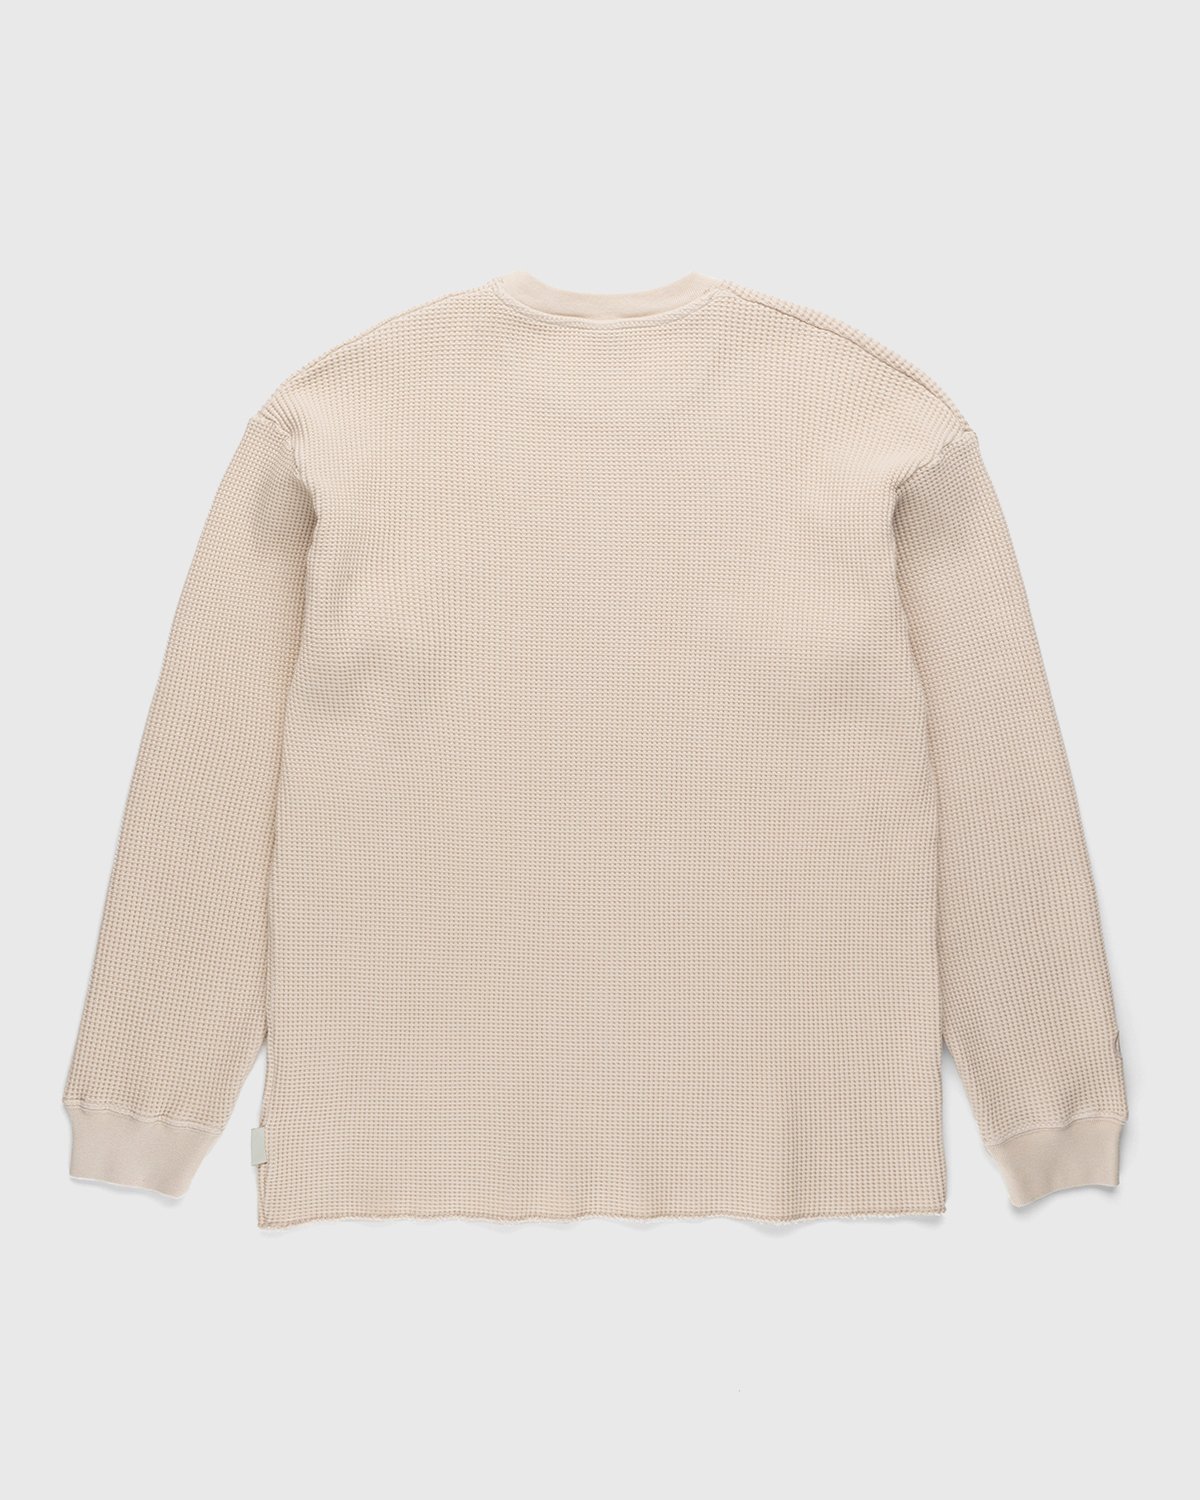 Highsnobiety - Thermal Staples Long Sleeve Off White - Clothing - Beige - Image 2